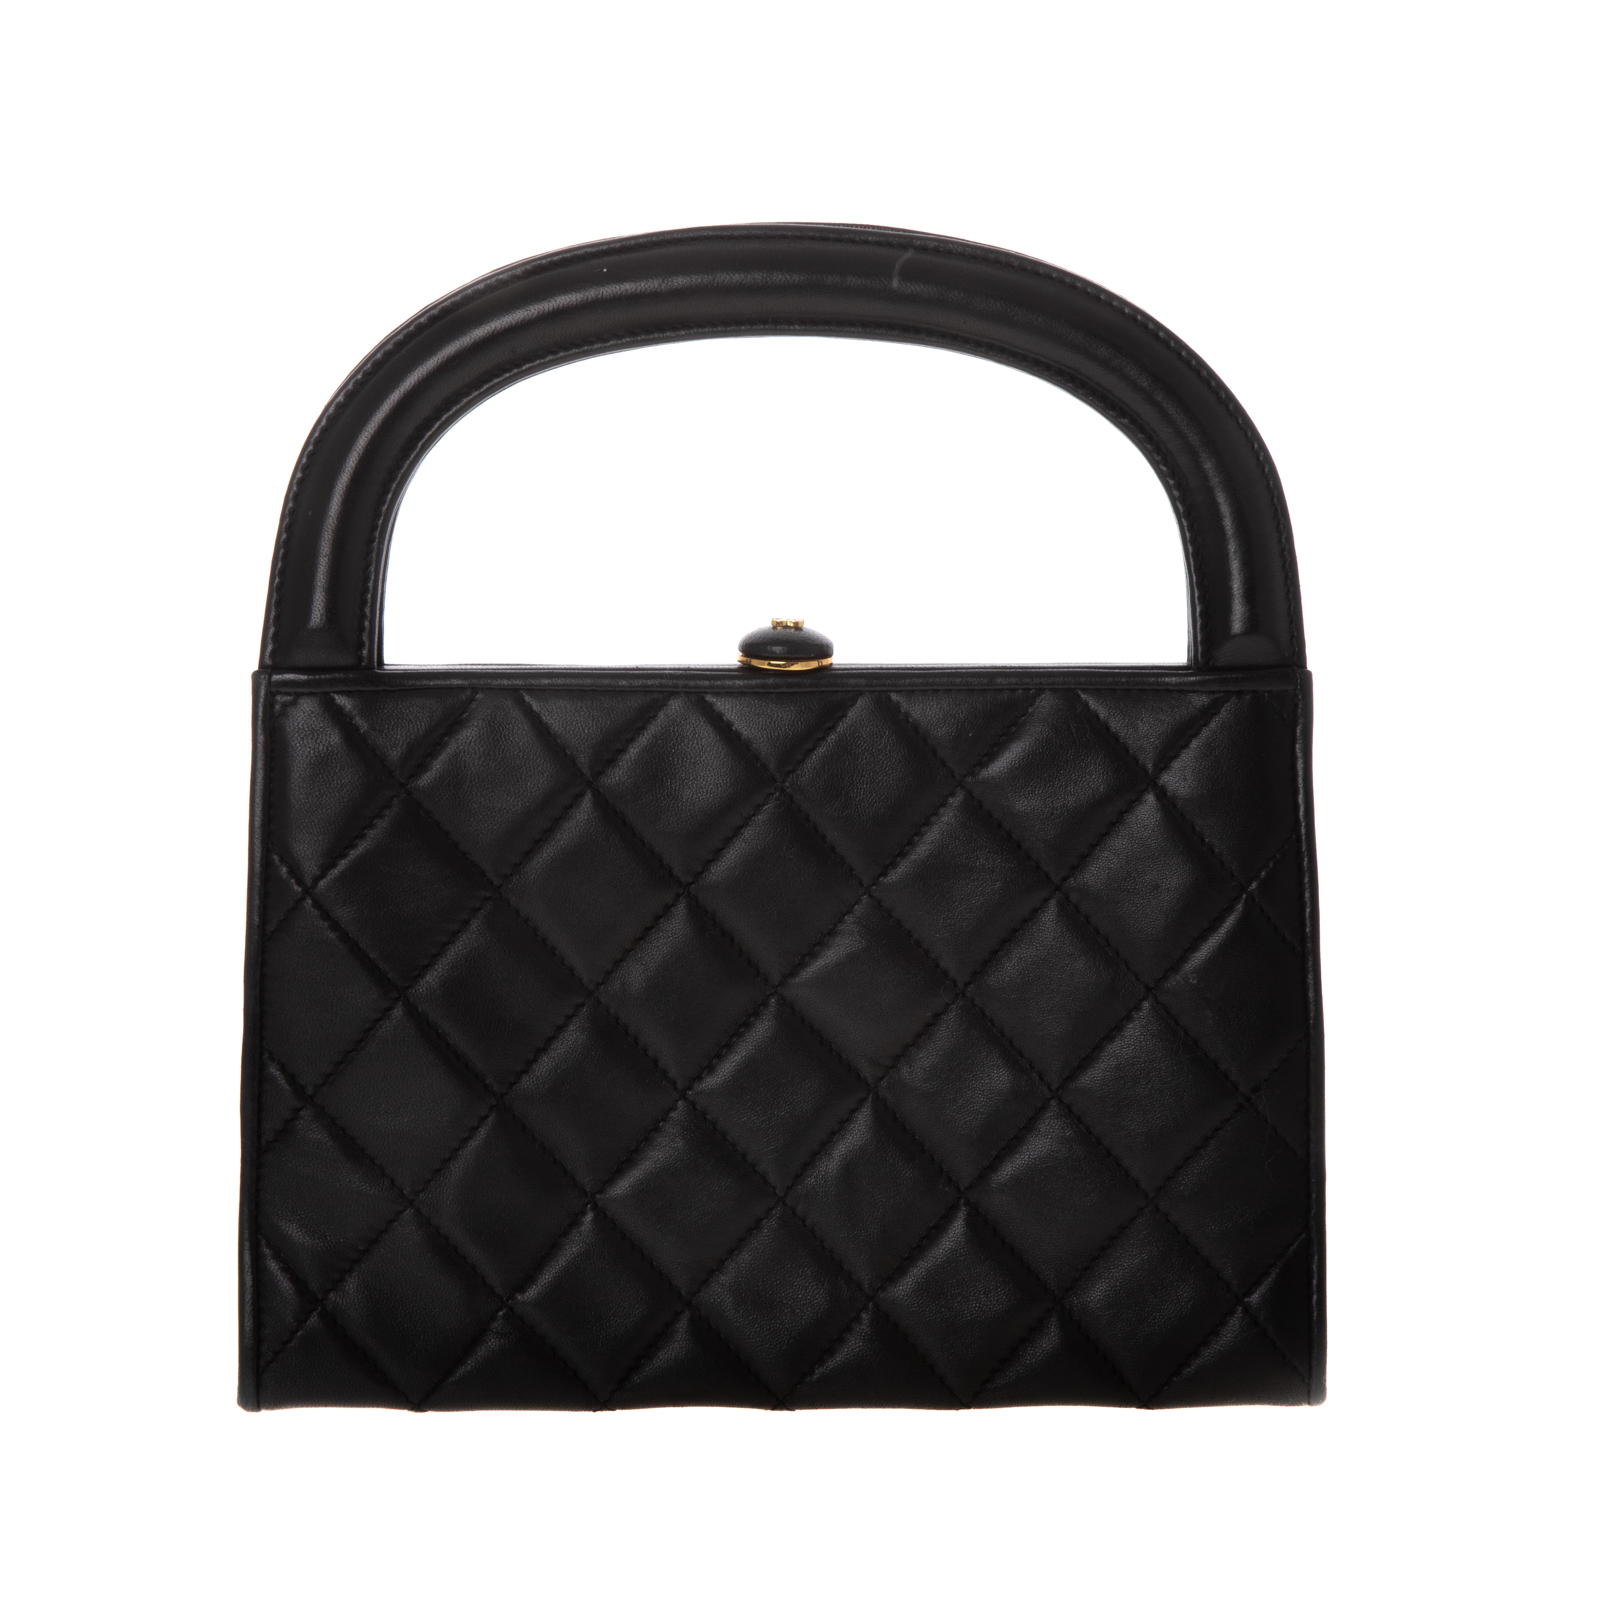 A CHANEL QUILTED TOP HANDLE A black